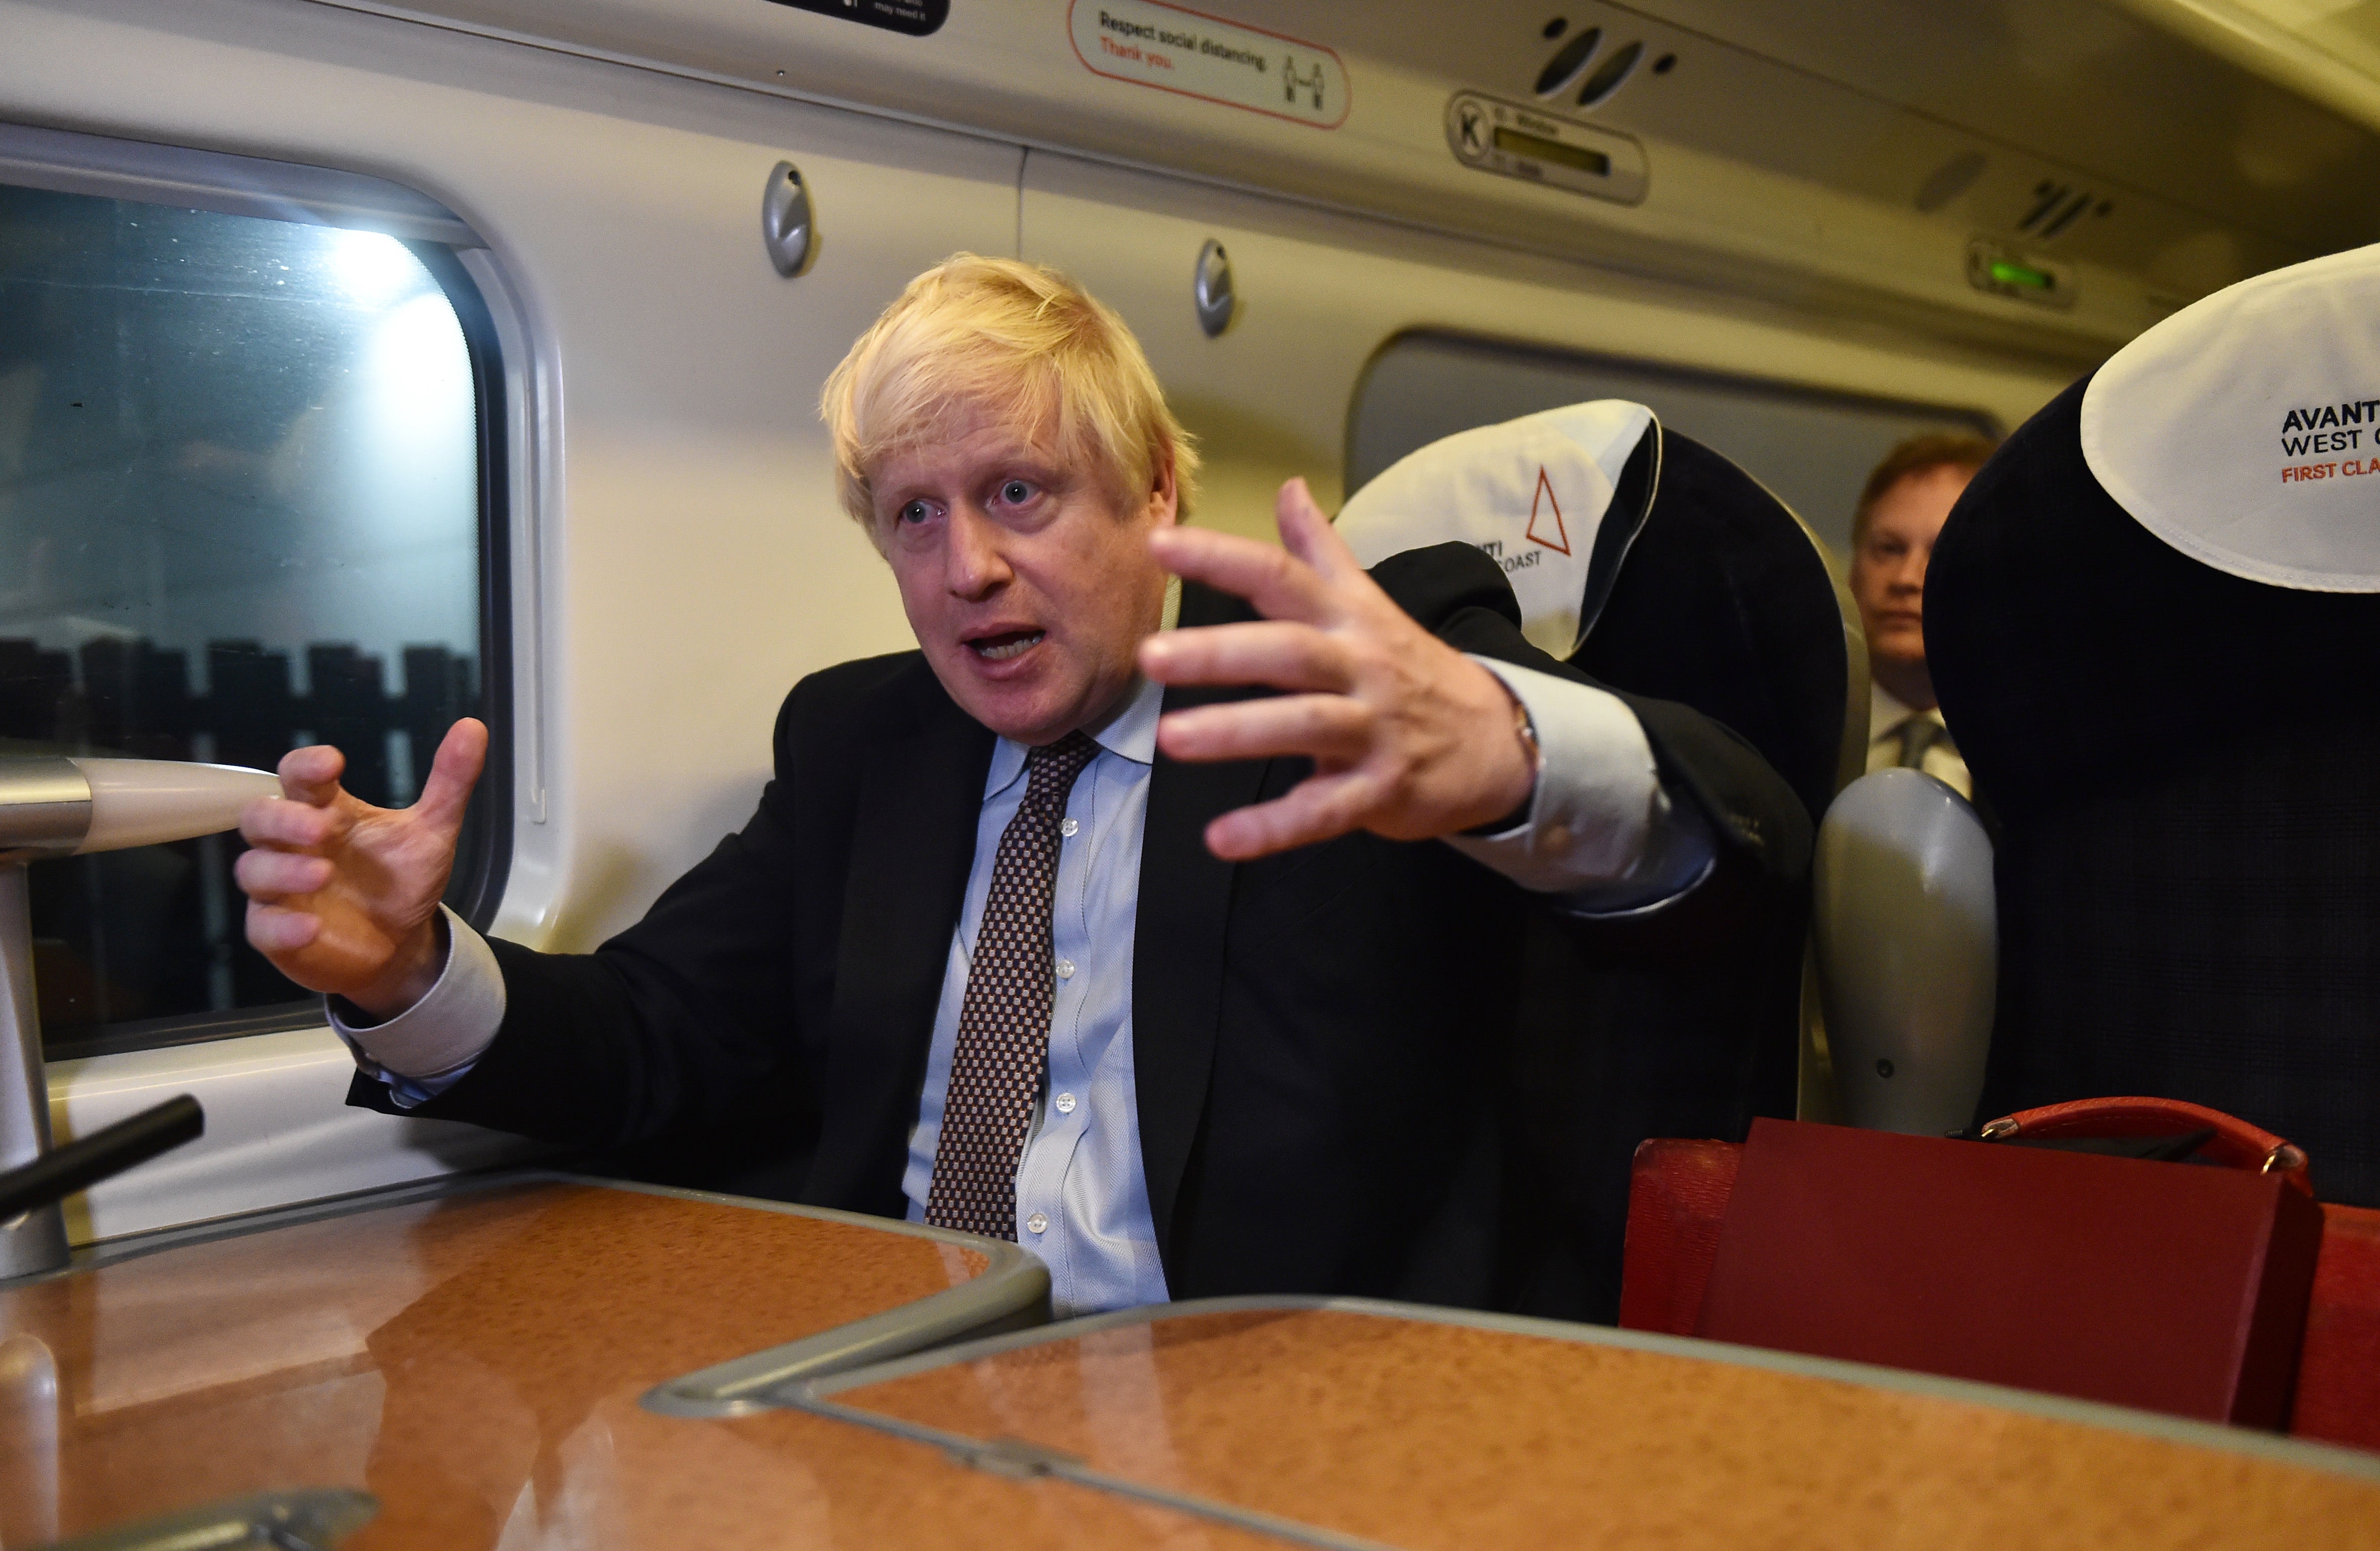 The prime minister launches a thousand train-based metaphors